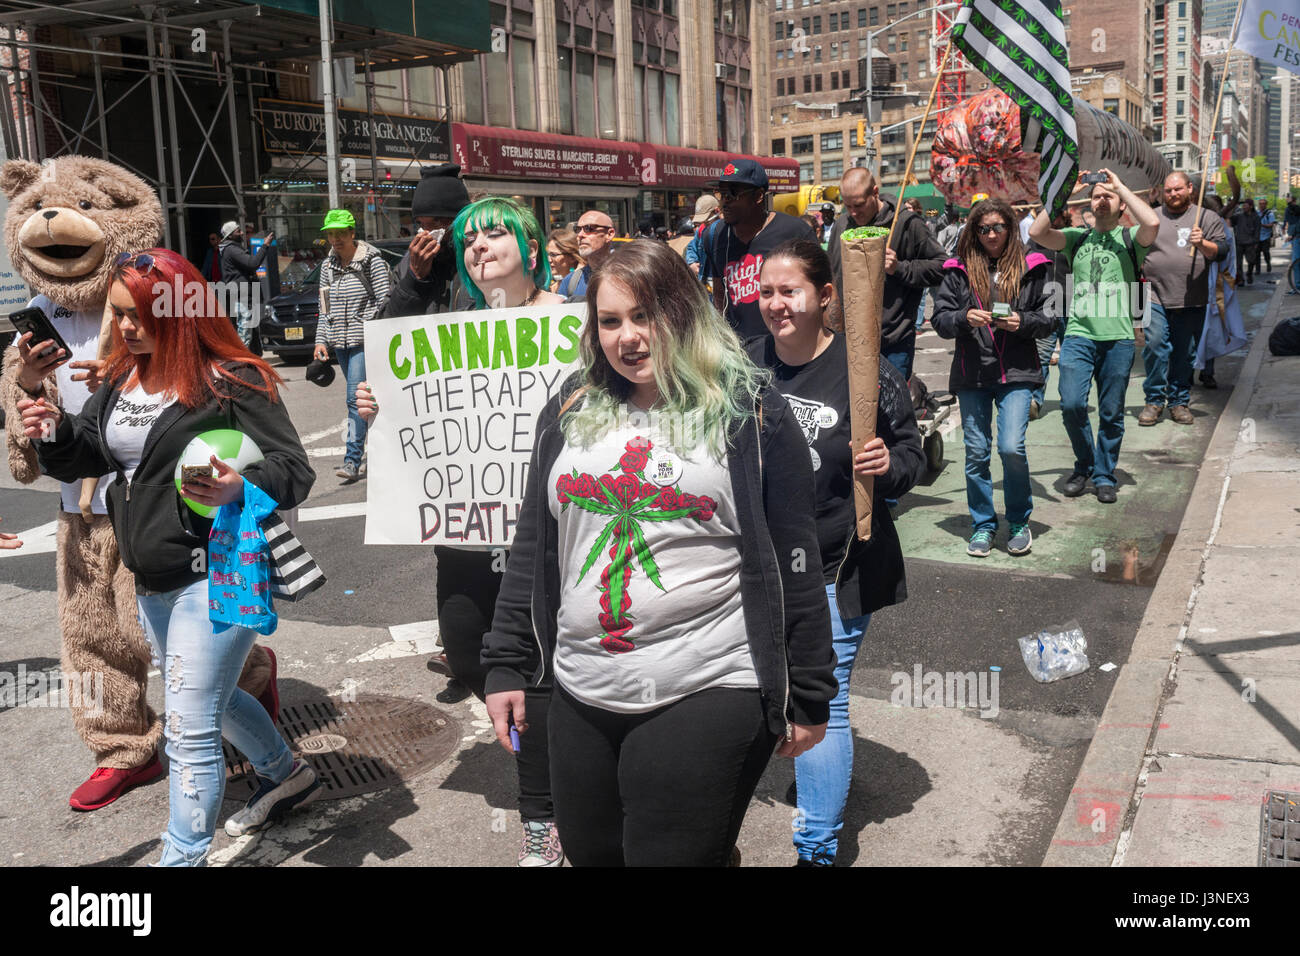 New York, USA. 06th May, 2017. Advocates for the legalization of marijuana march in New York on Saturday, May 6, 2017 at the annual NYC Cannabis Parade. The march included a wide range of demographics from millennials to old-time hippies. The participants in the parade are calling for the legalization of marijuana for medical treatment and for recreational uses. ( © Richard B. Levine) Credit: Richard Levine/Alamy Live News Stock Photo